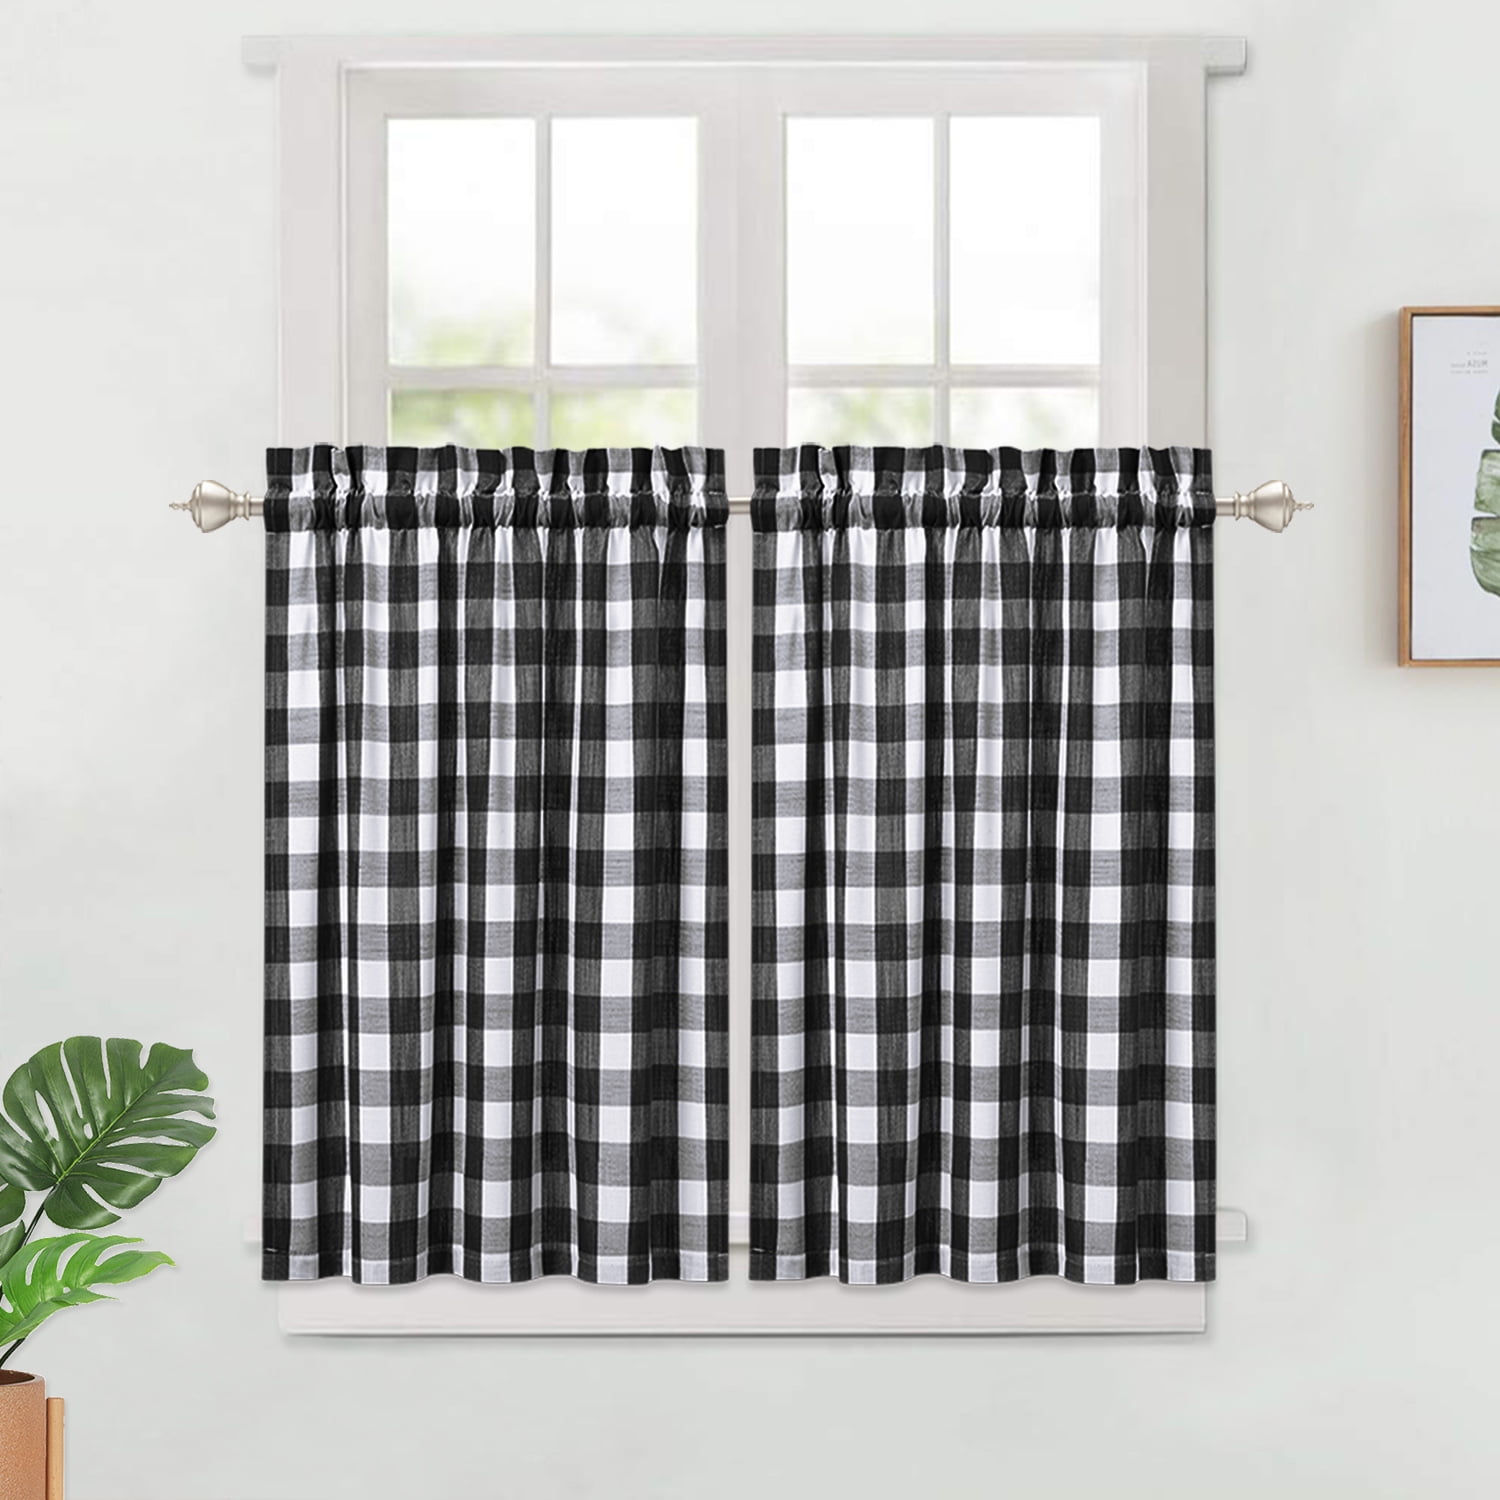 Haperlare Kitchen Cafe Curtains 45 Inches Length 28 x 45 Grey/White Plaid Gingham Design Half Window Covering Tier Curtains Set of 2 Buffalo Checker Pattern Short Bathroom Window Curtain 